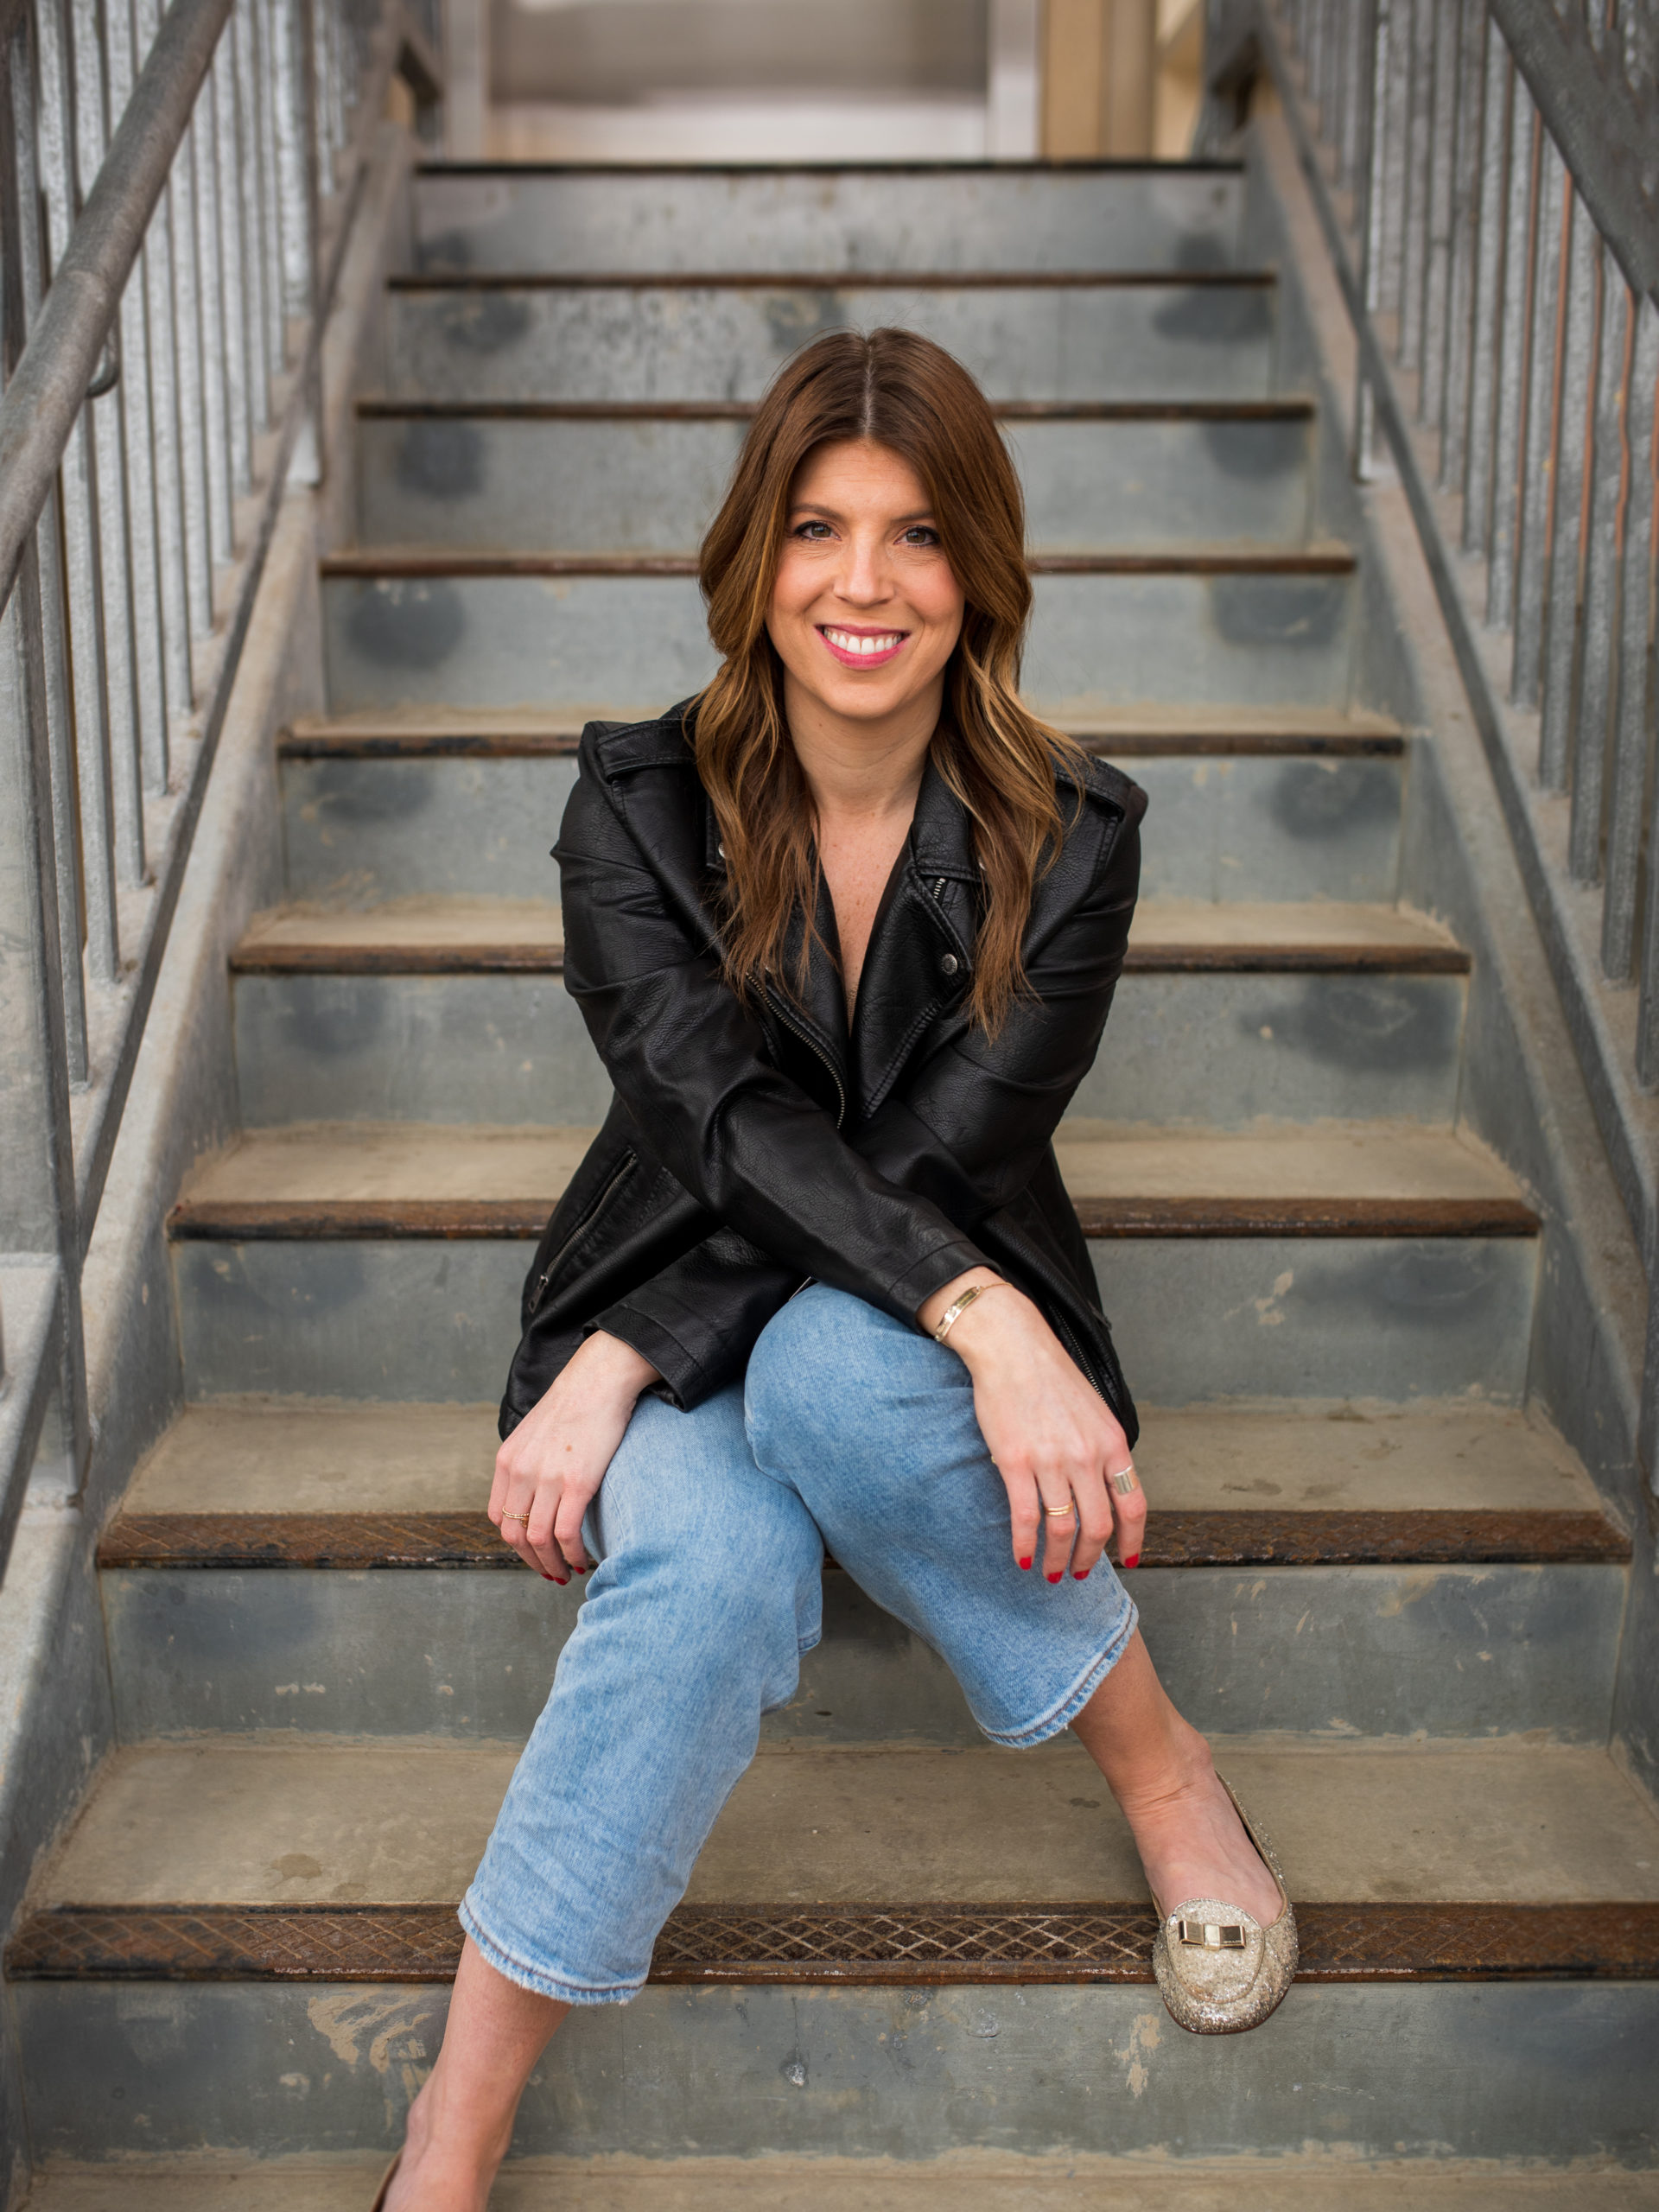 smiling woman sitting on concrete steps in a stairwell